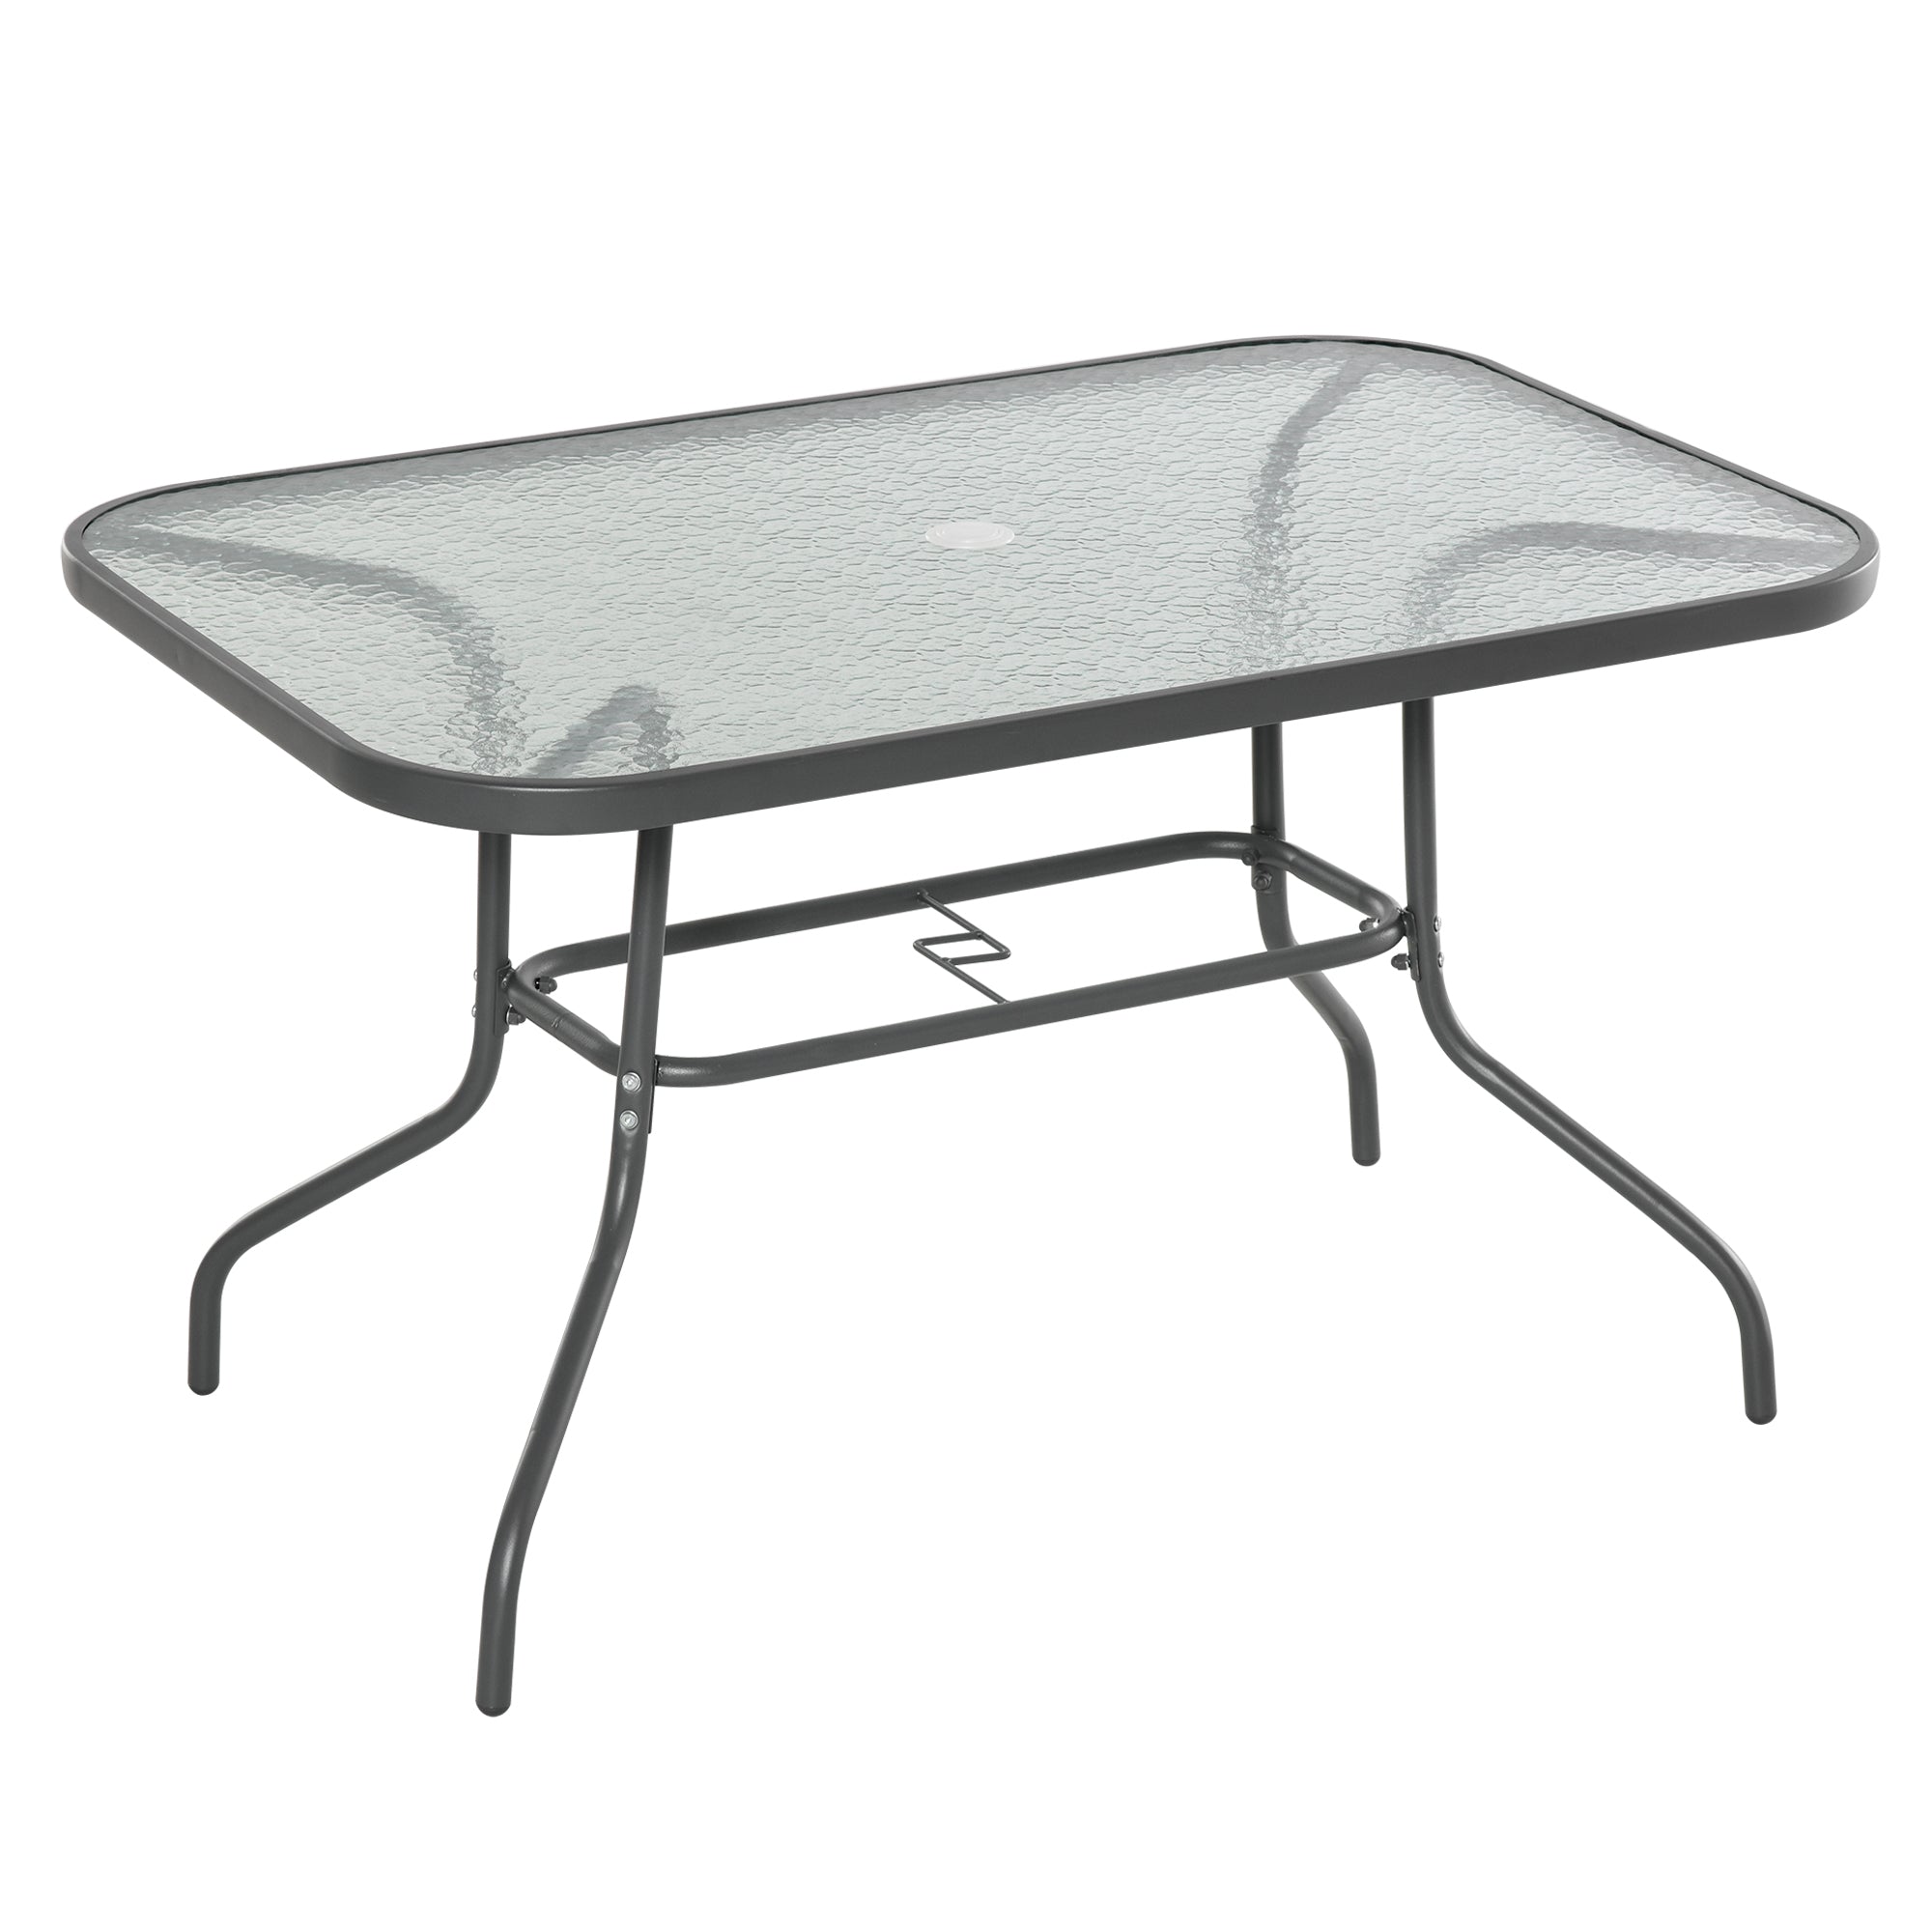 Glass Top Garden Table Curved Metal Frame w/ Parasol Hole 4 Legs Outdoor Balcony Sturdy Friends Family Dining Table -Grey-0